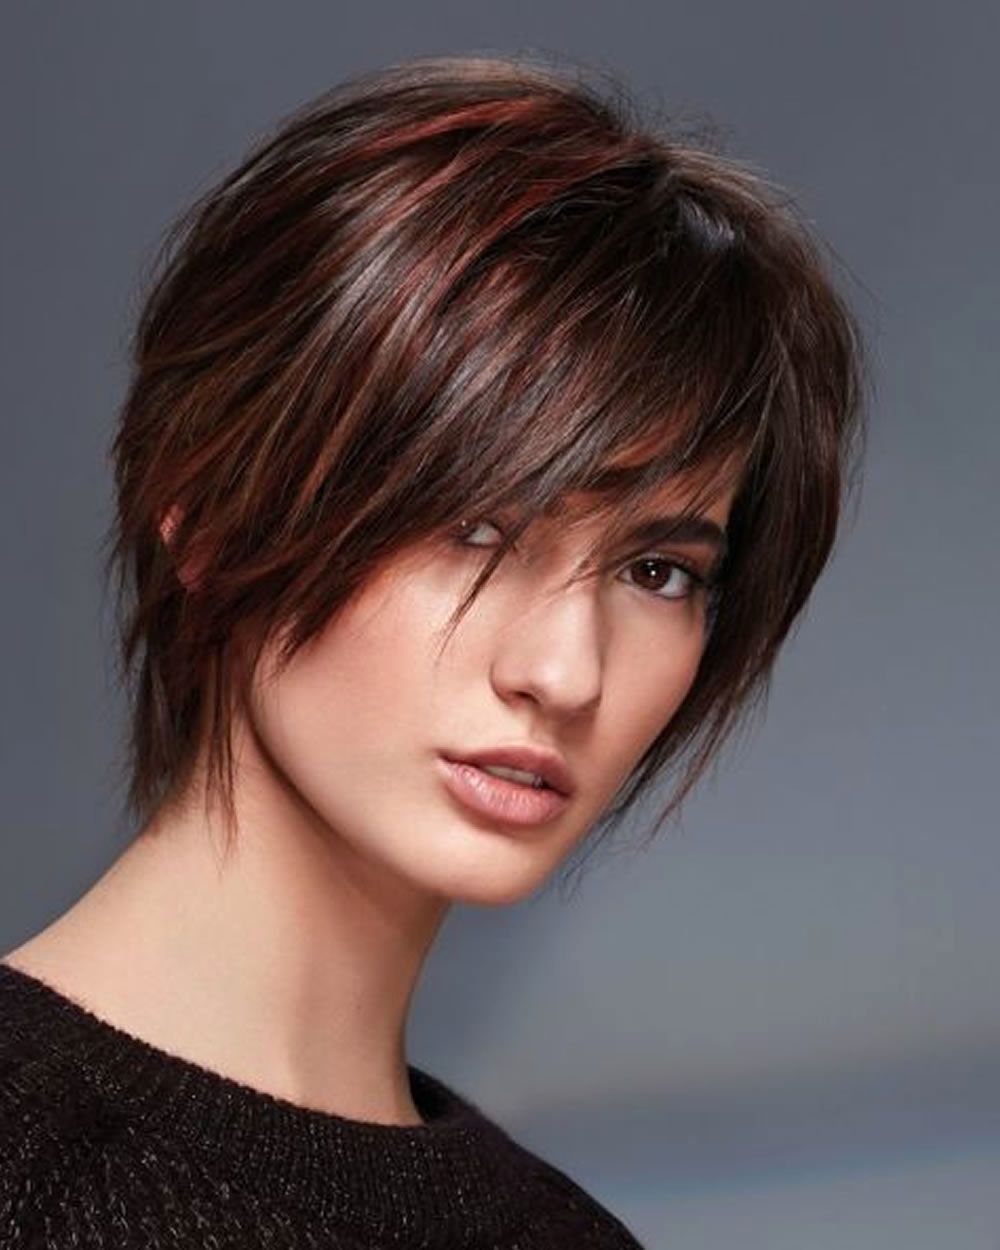 Hairstyles For Oval Faces 2018 Best Short Hairstyles For Oval Faces Regarding Short Hairstyles For Women With Oval Faces (View 24 of 25)